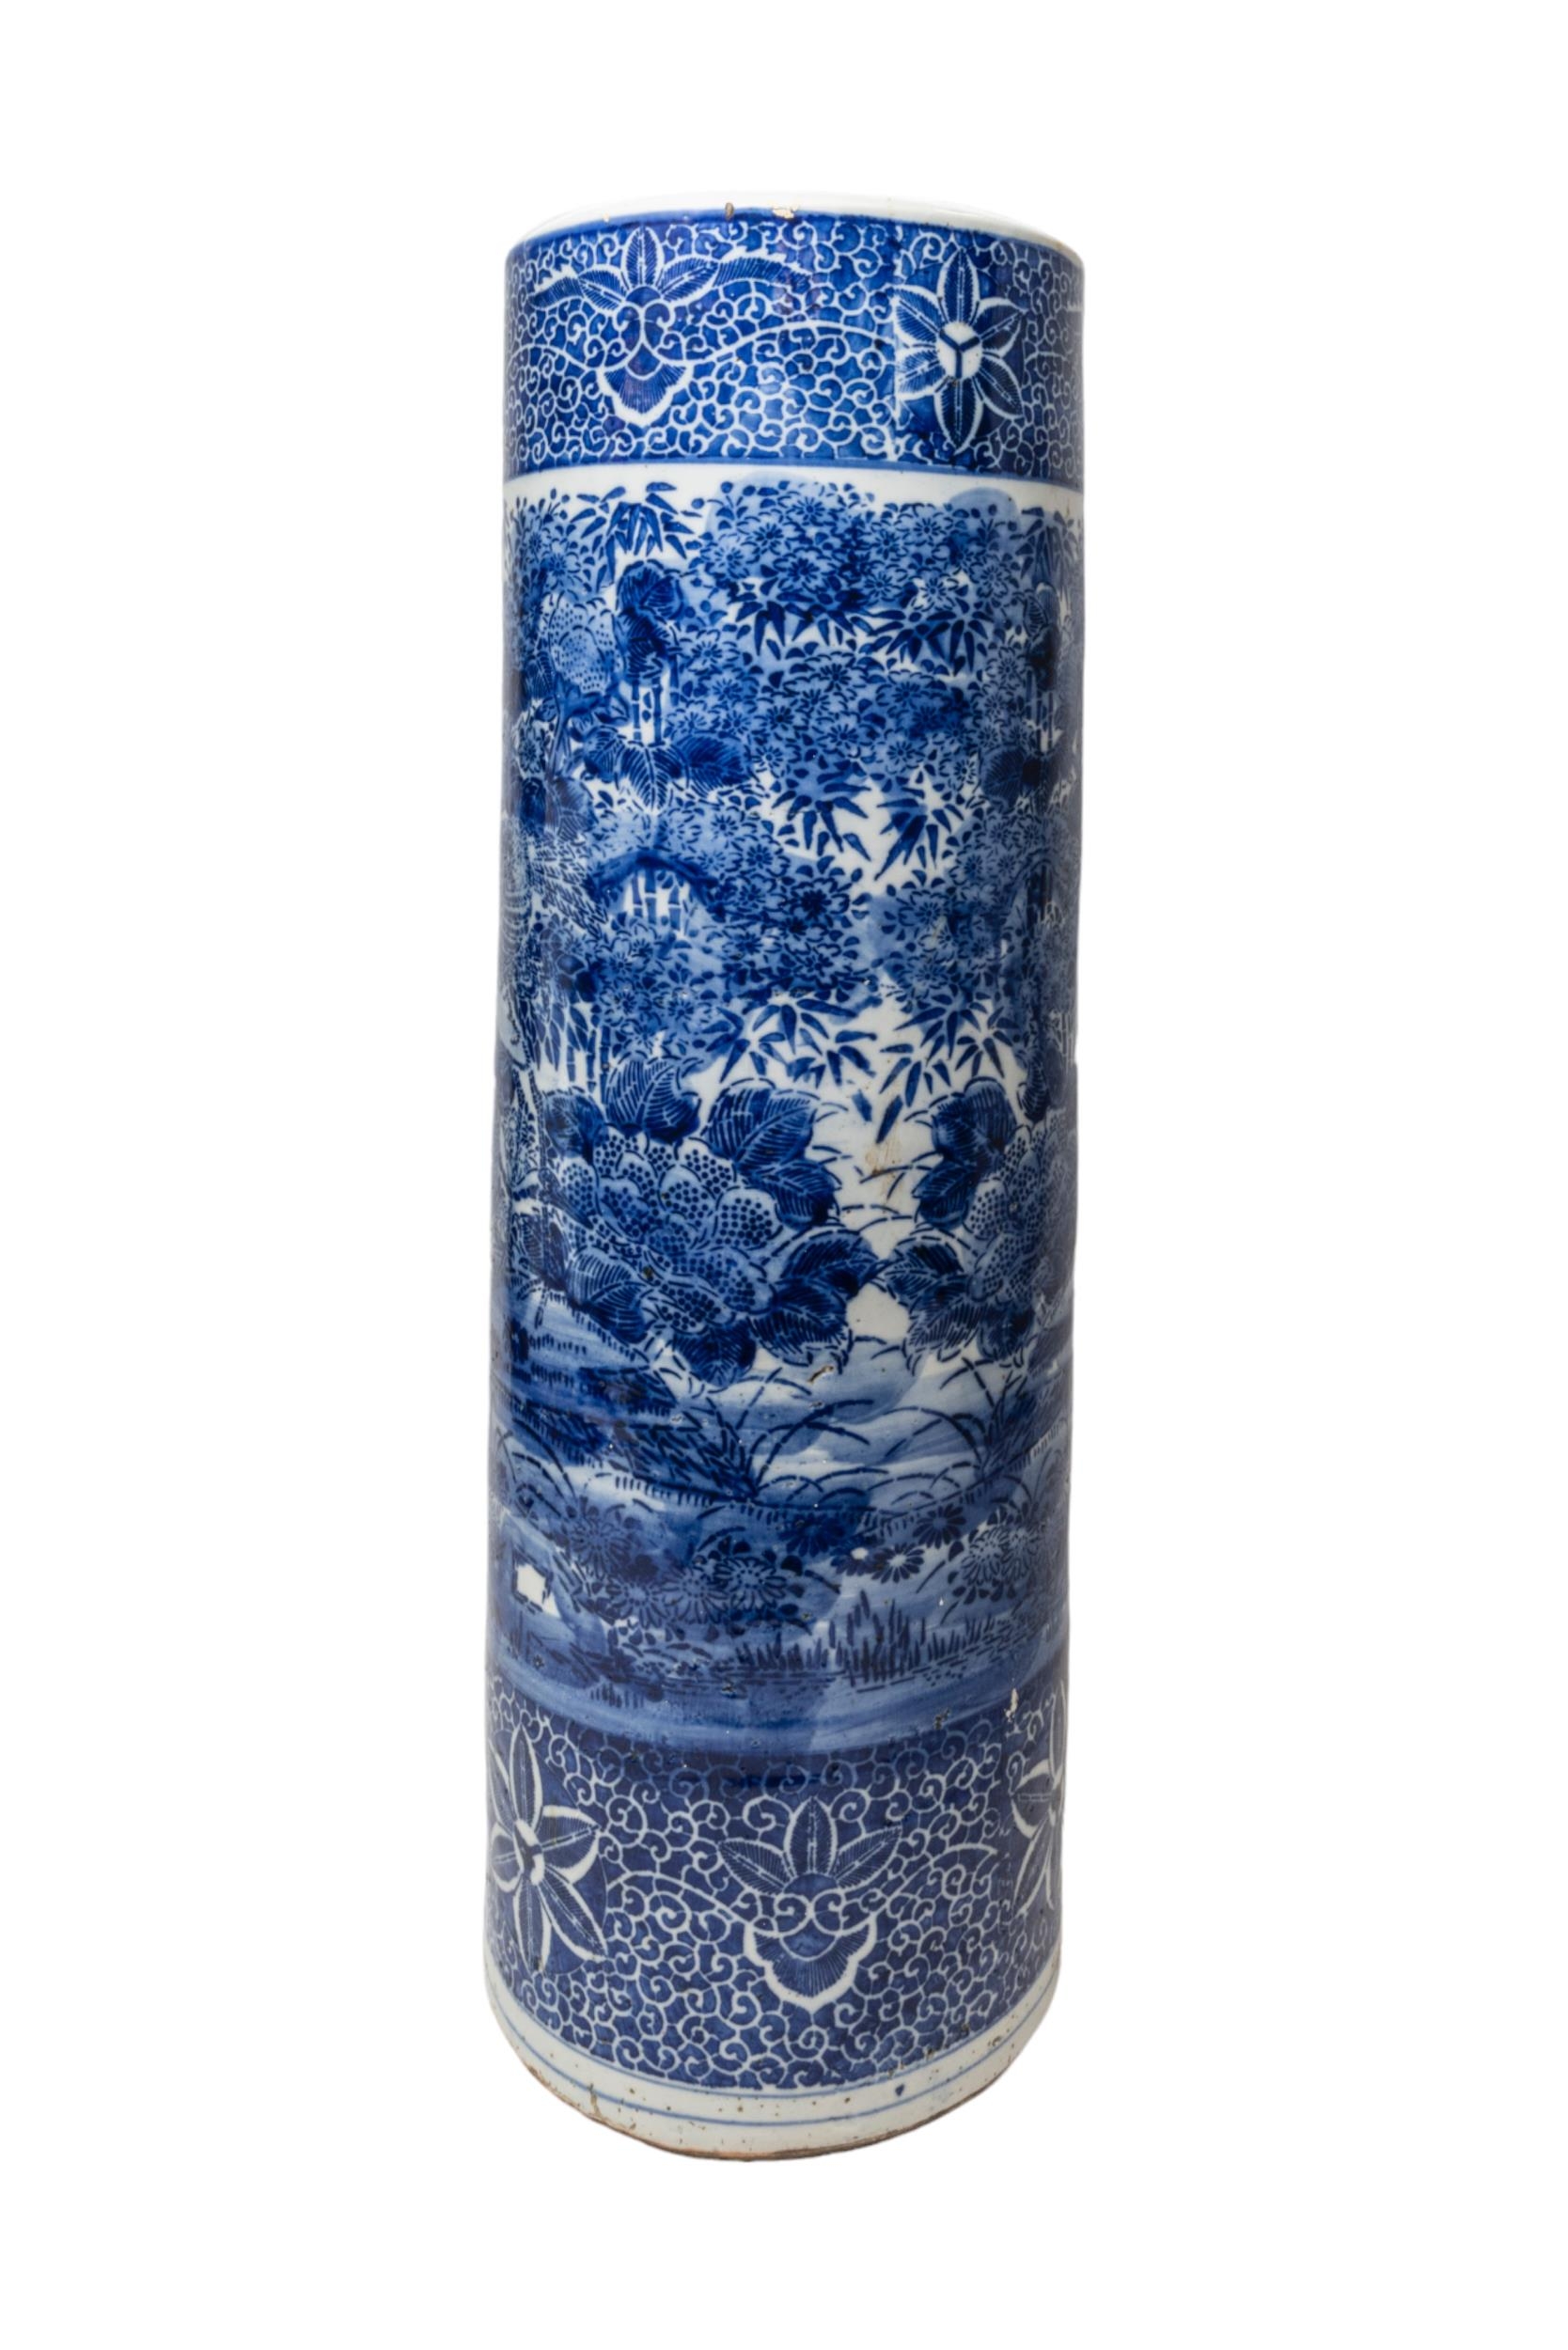 A CHINESE BLUE AND WHITE CERAMIC STICK STAND, LATE QING DYNASTY, the cylindrical sides decorated - Image 2 of 2